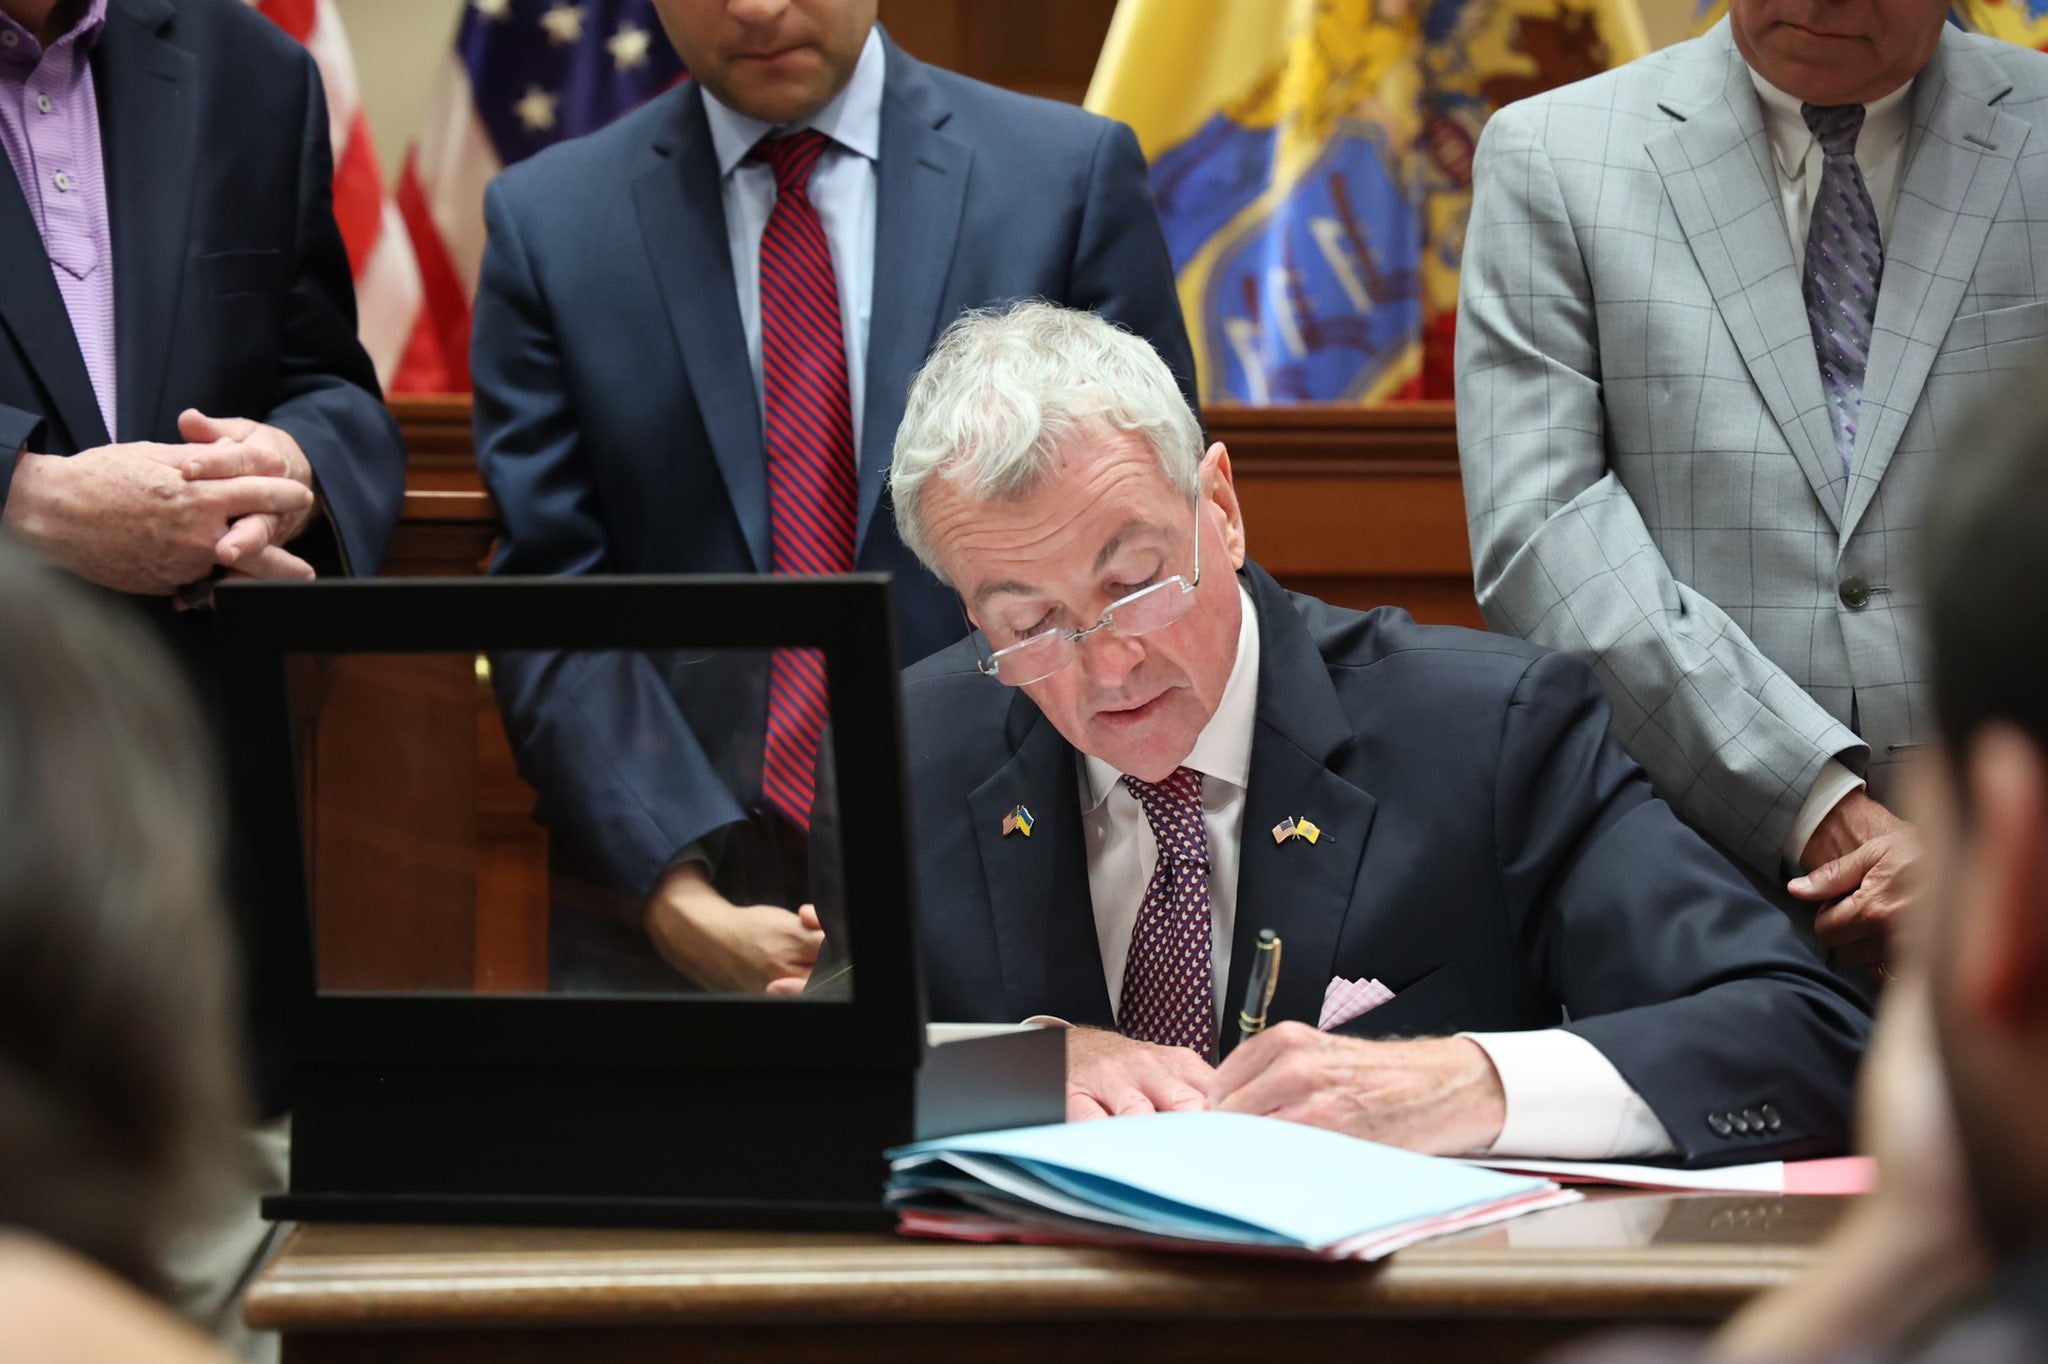 New Jersey governor signs wide-ranging restrictions on carrying